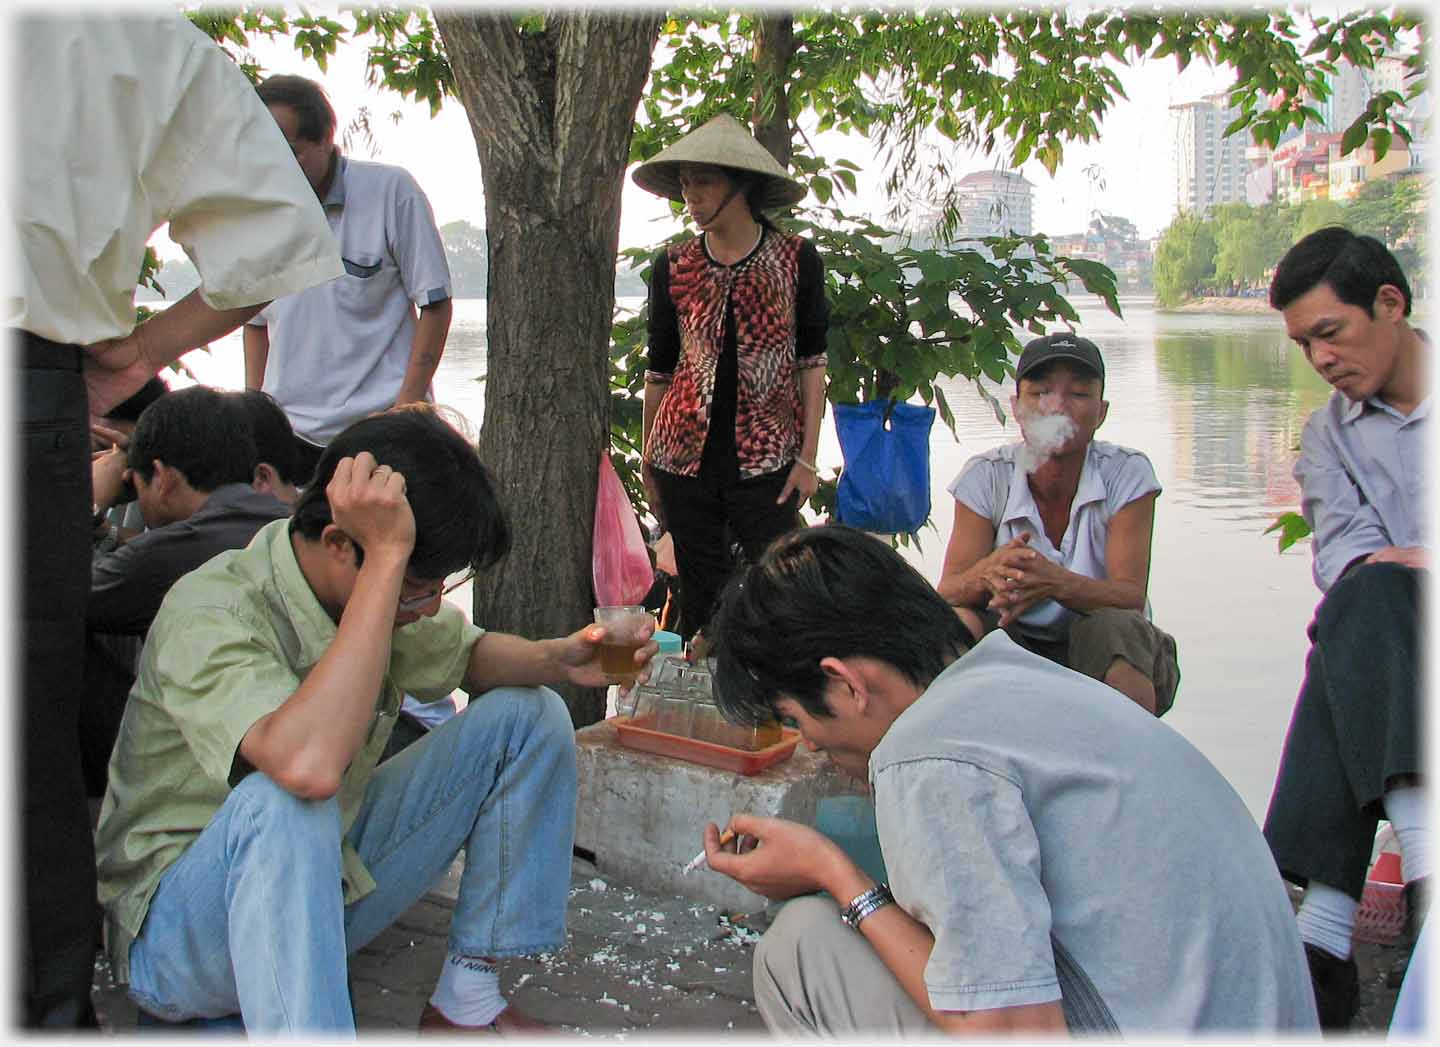 Chess players looking down, holding tea and hoolding cigarette. Tea seller behind. Man blowing smoke.